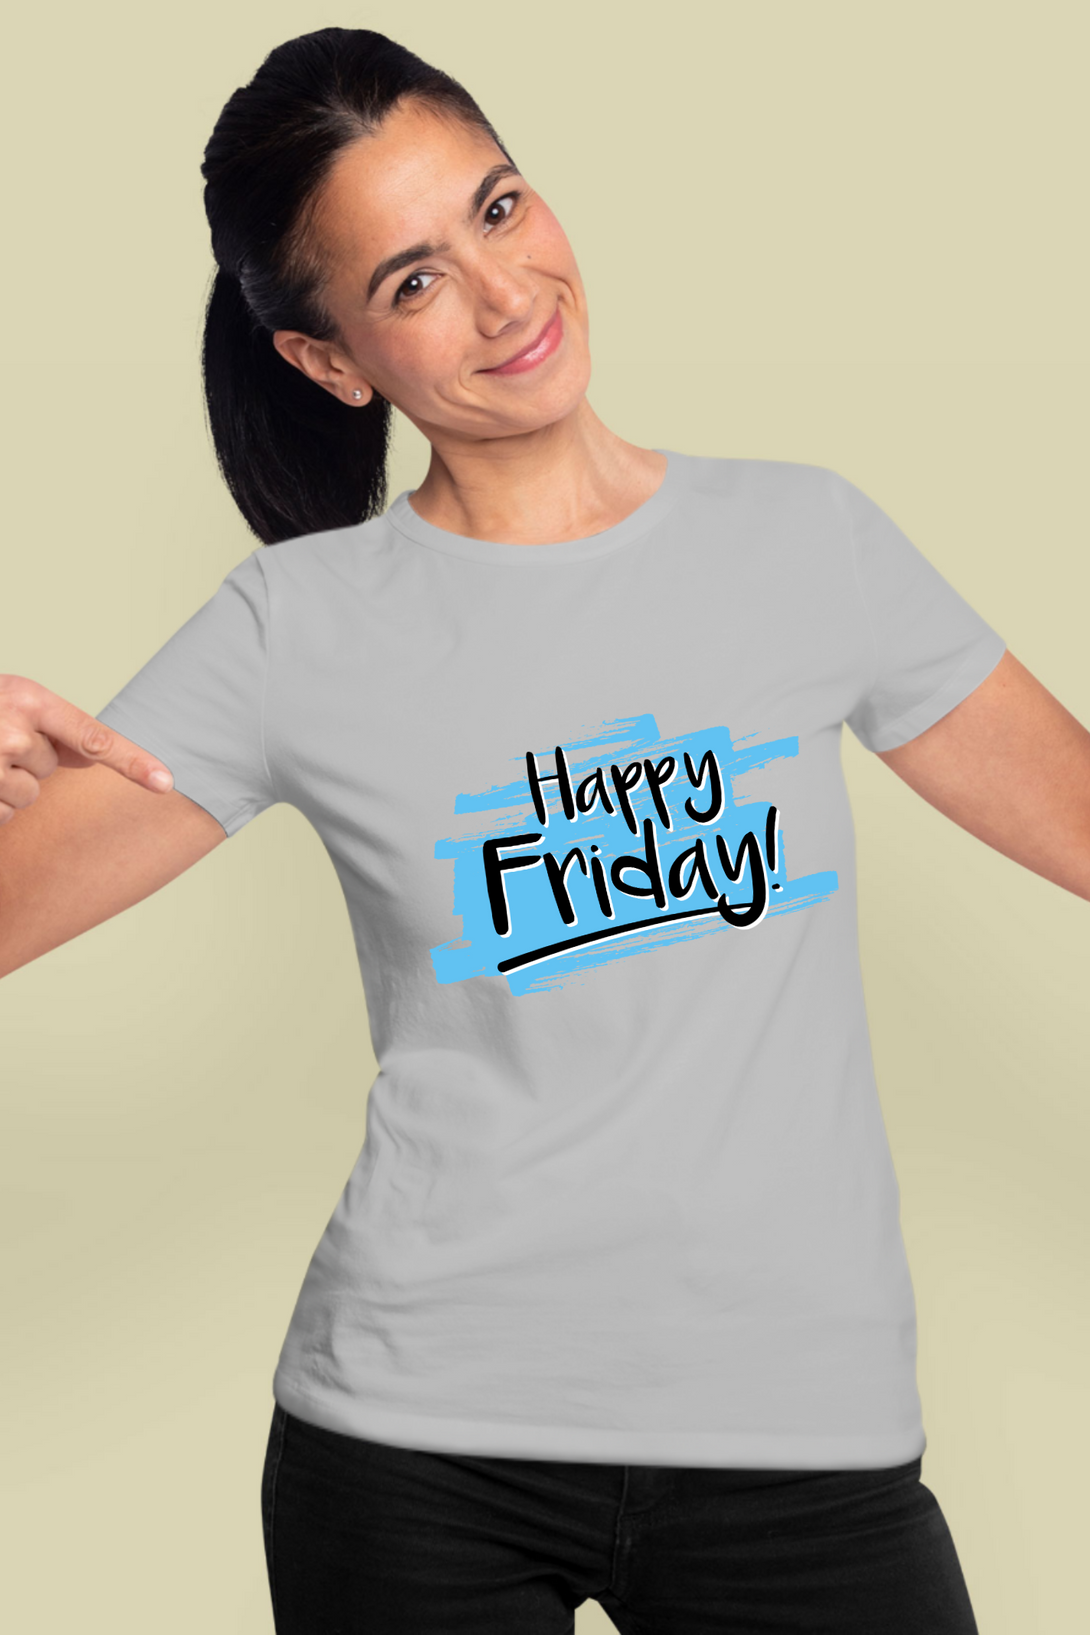 Happy Friday Printed T-Shirt For Women - WowWaves - 13